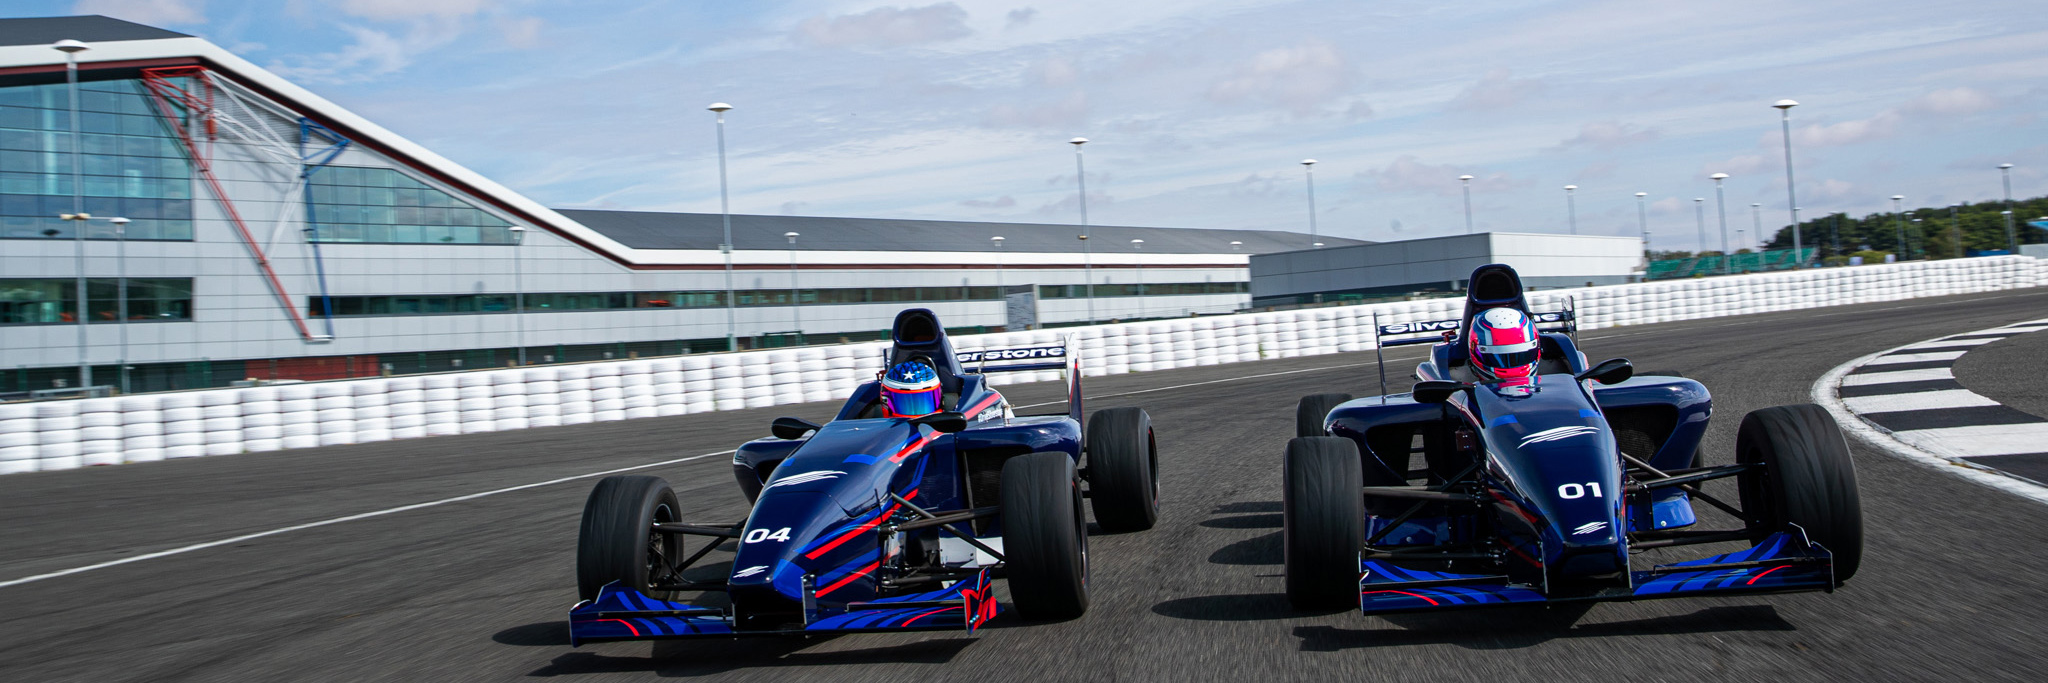 Silverstone Formula Singe Seaters racing round a corner during a driving experience